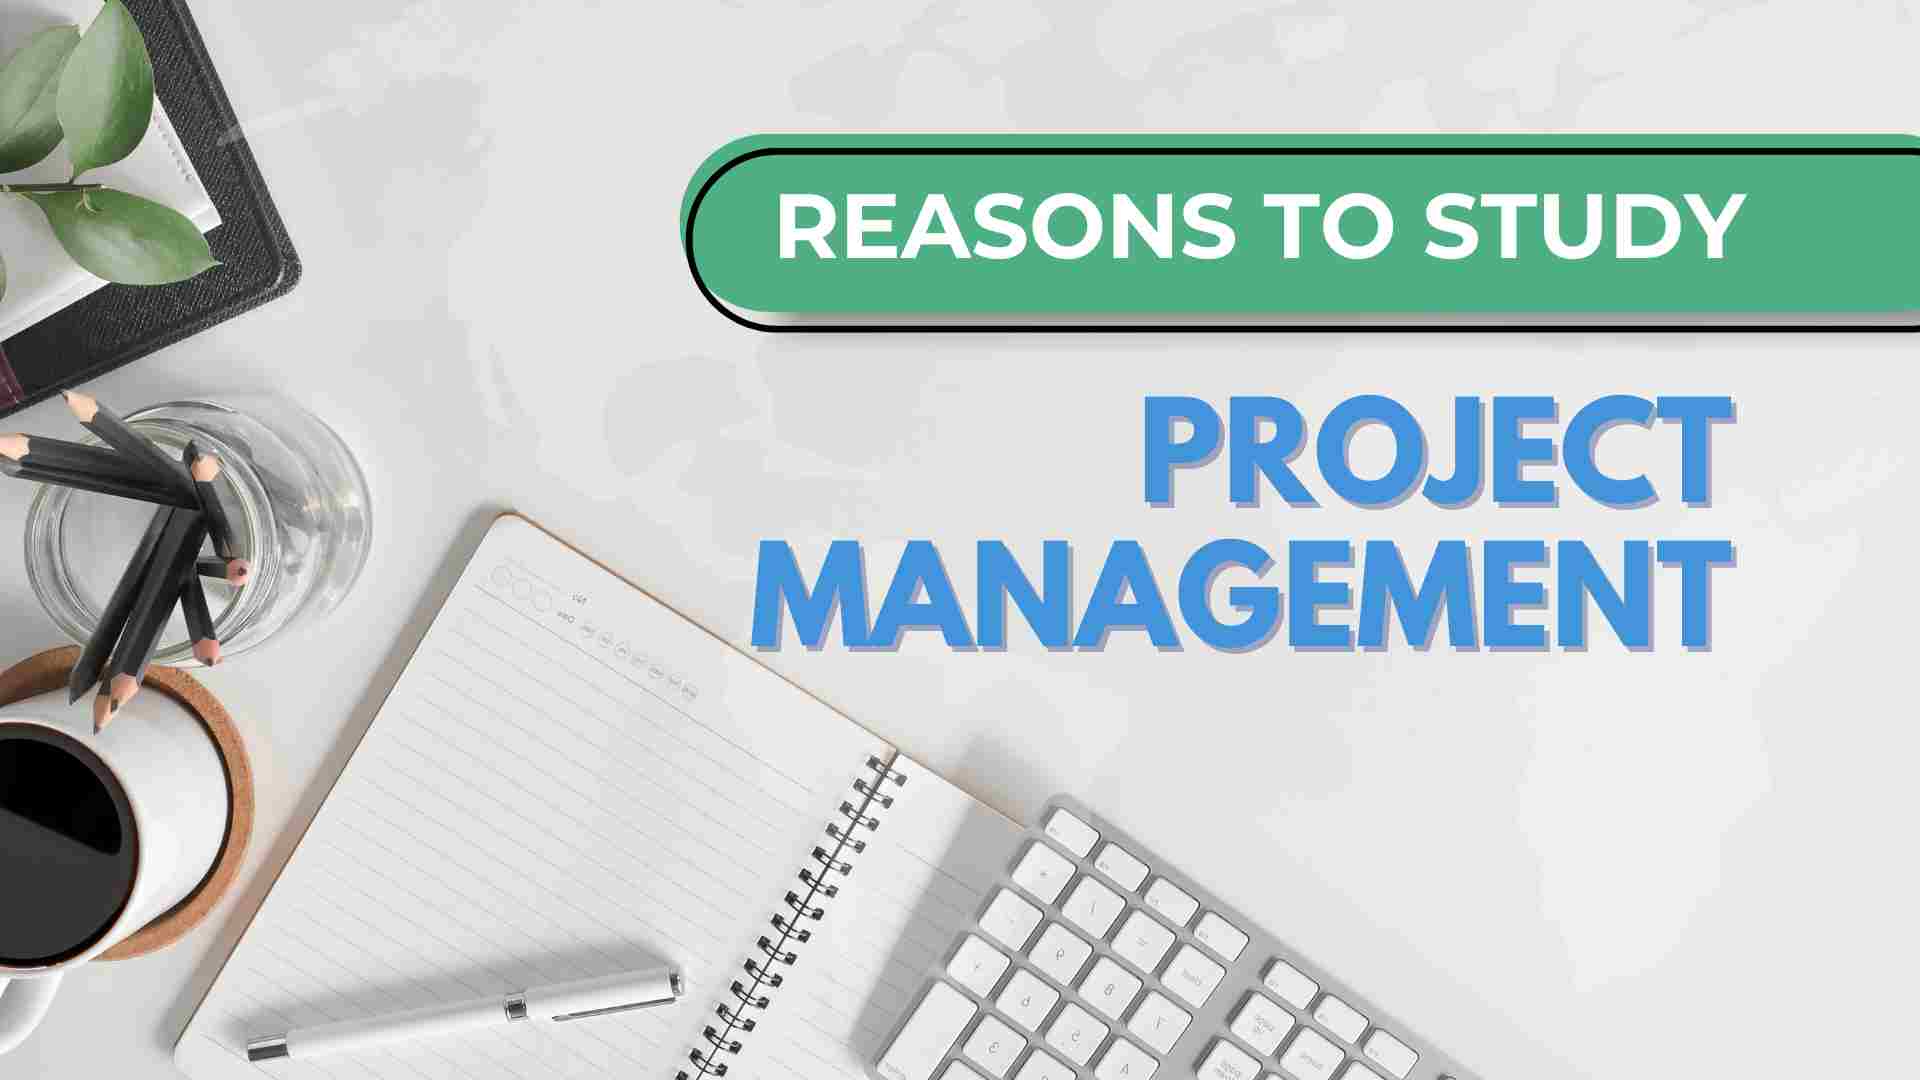 Reasons to study Project Management